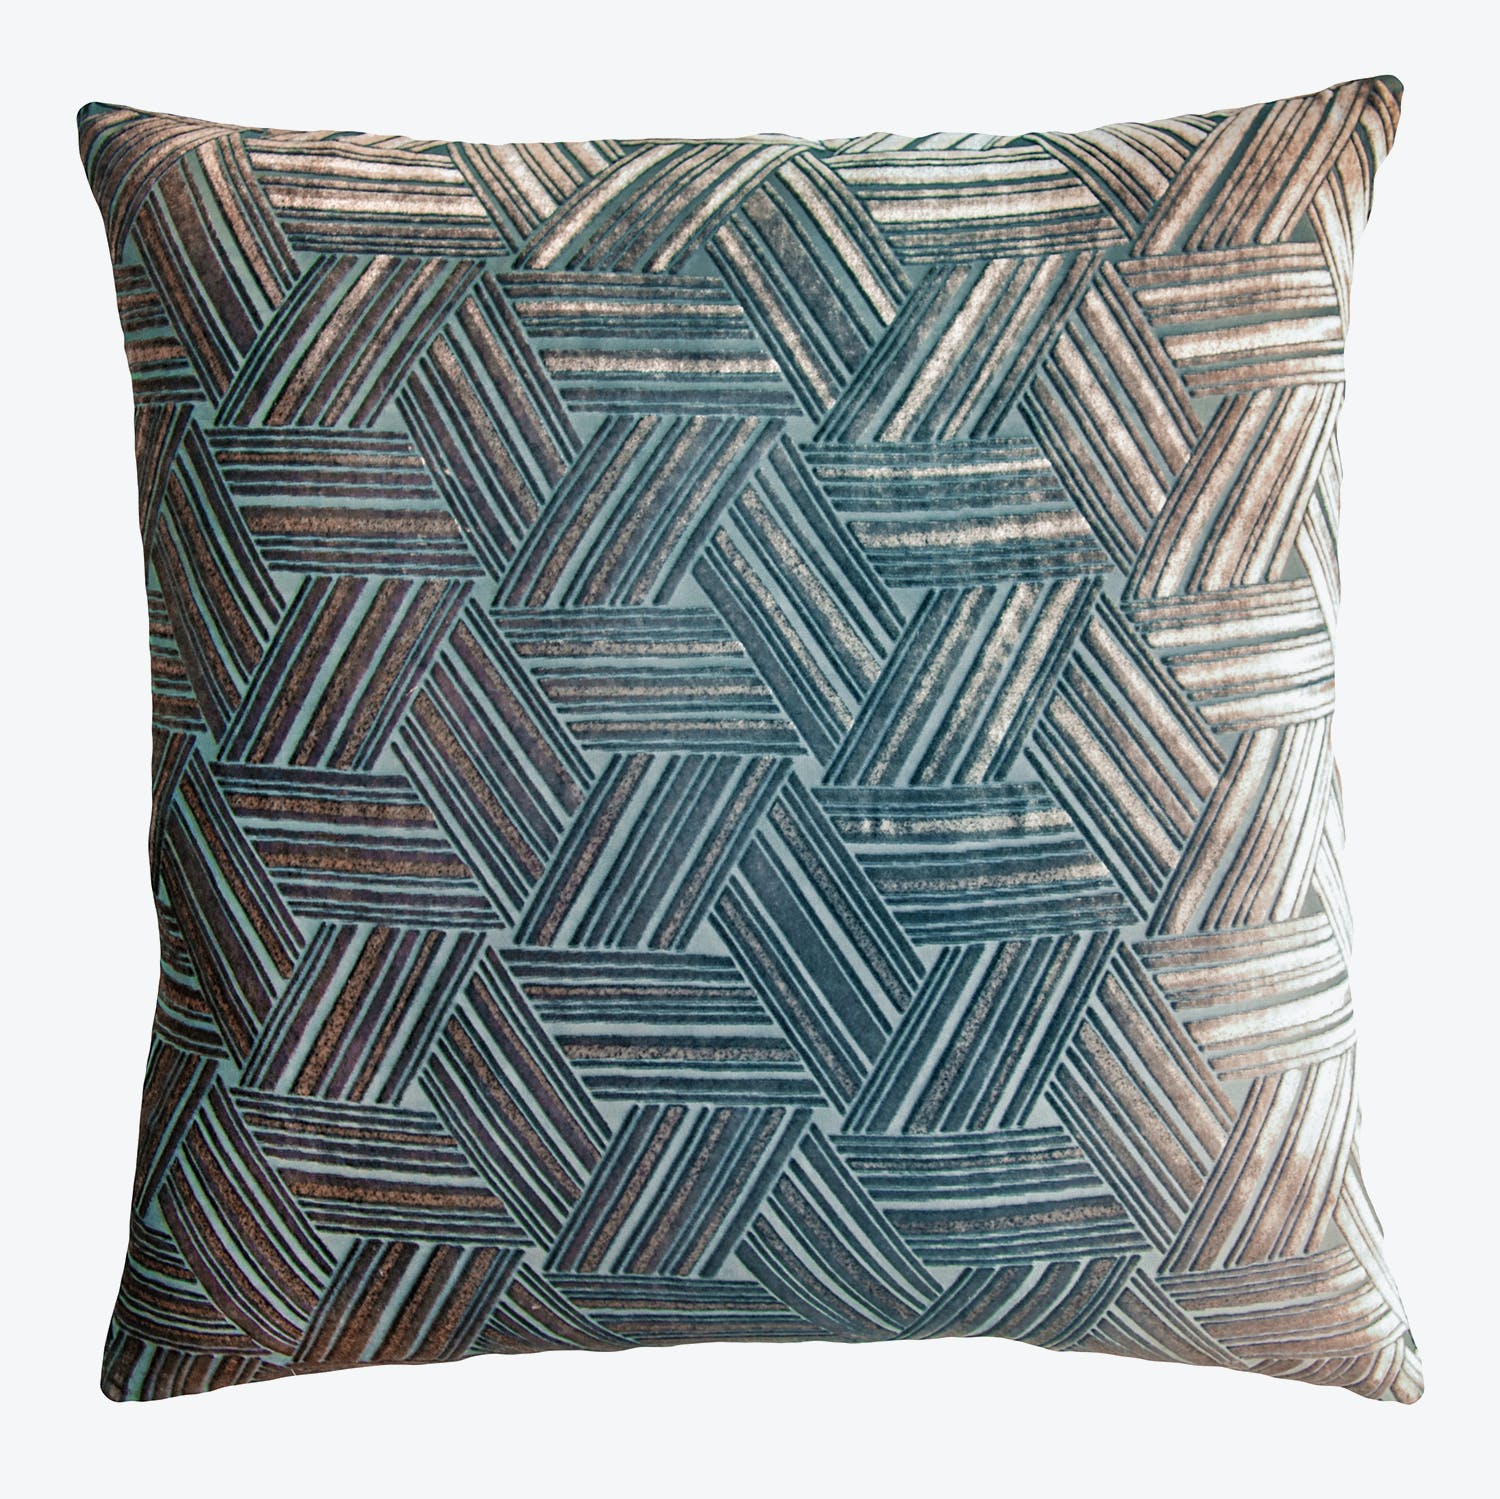 Vintage-style square pillow with blue and grey geometric pattern.